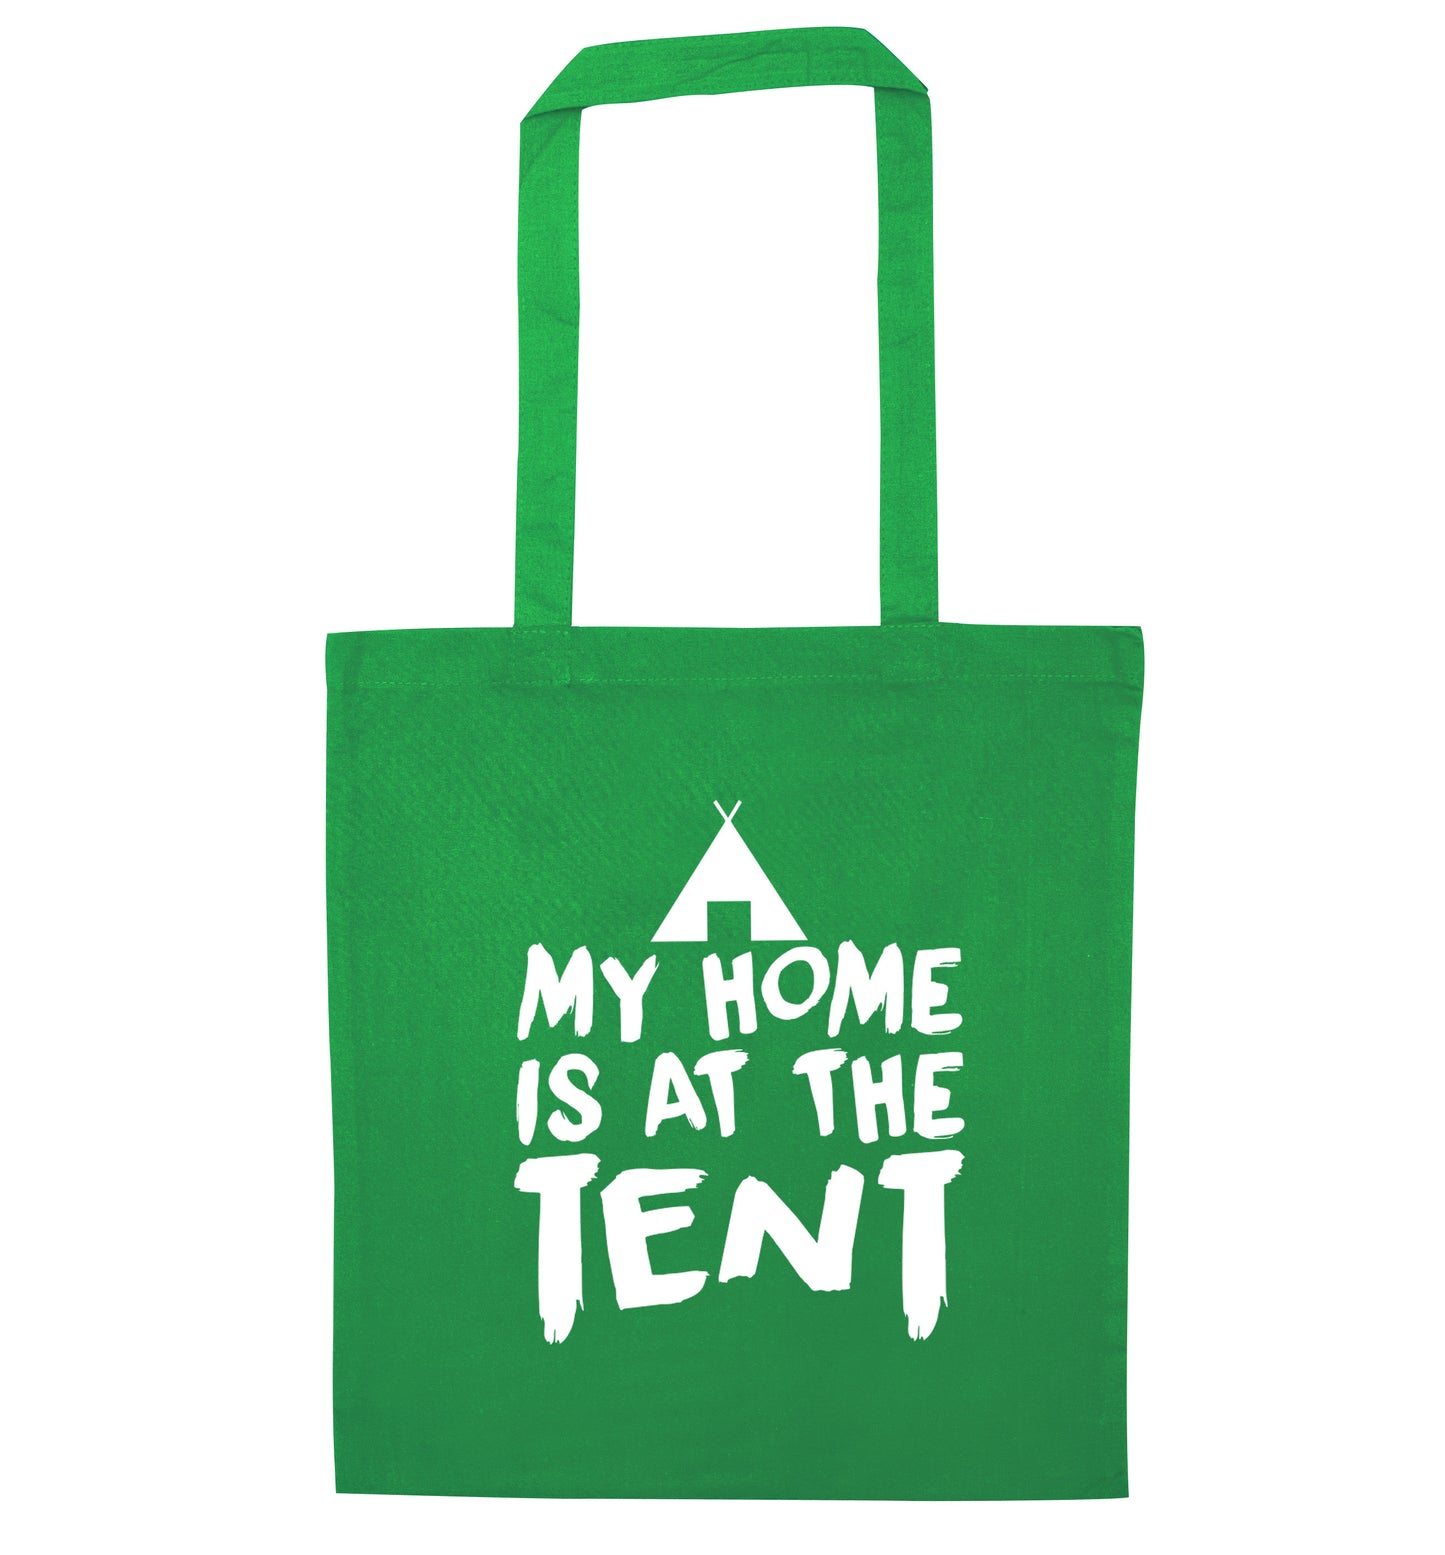 My home is at the tent green tote bag